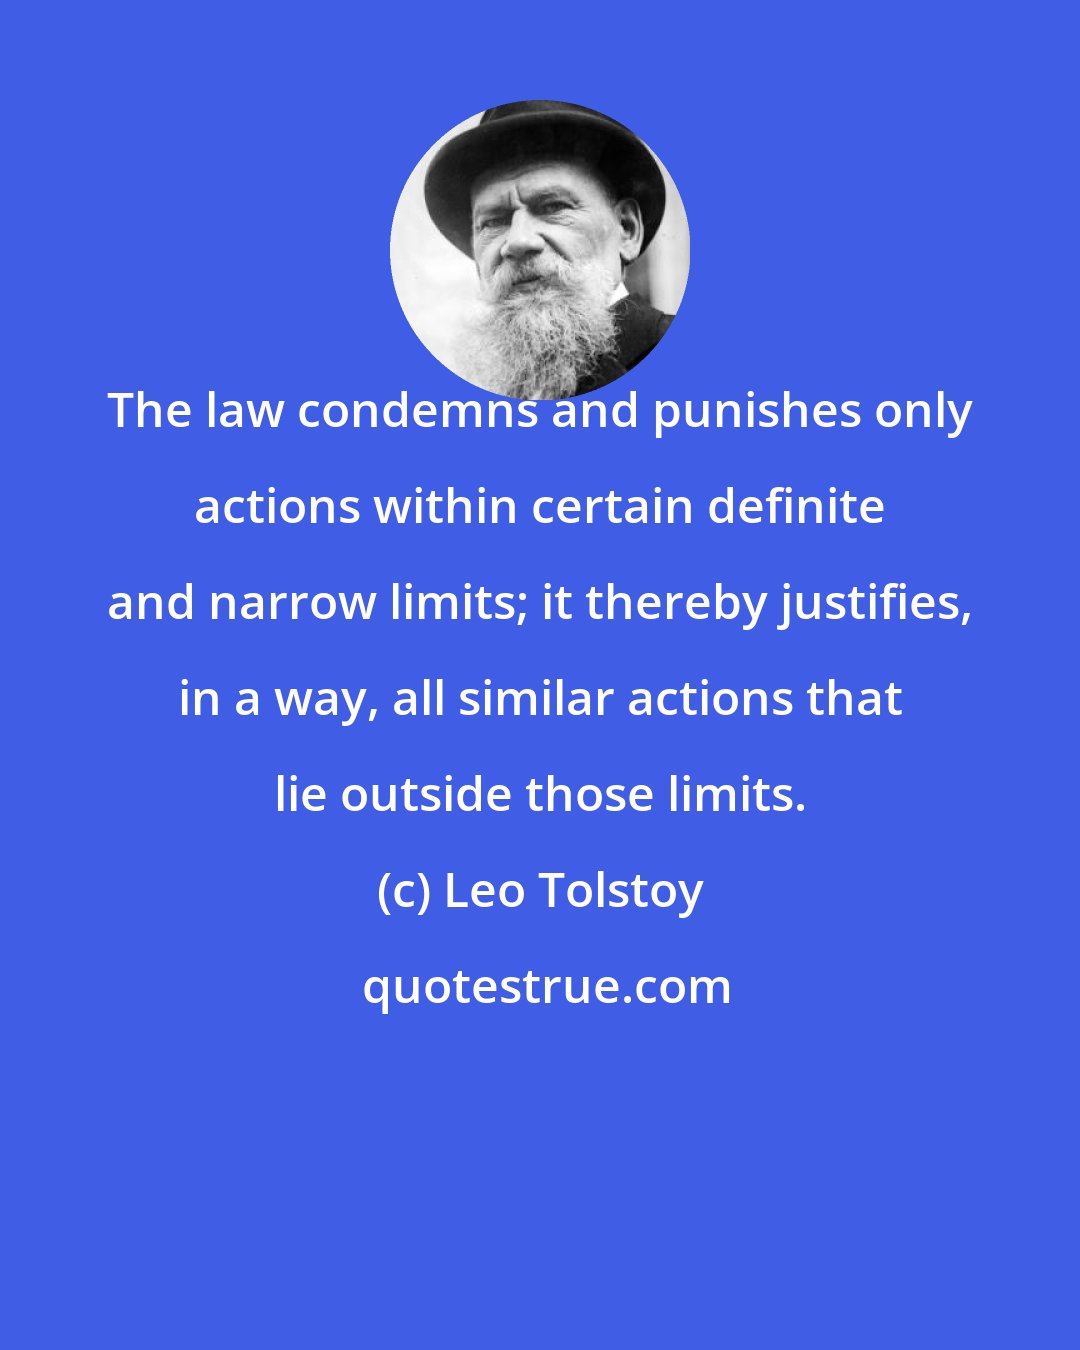 Leo Tolstoy: The law condemns and punishes only actions within certain definite and narrow limits; it thereby justifies, in a way, all similar actions that lie outside those limits.